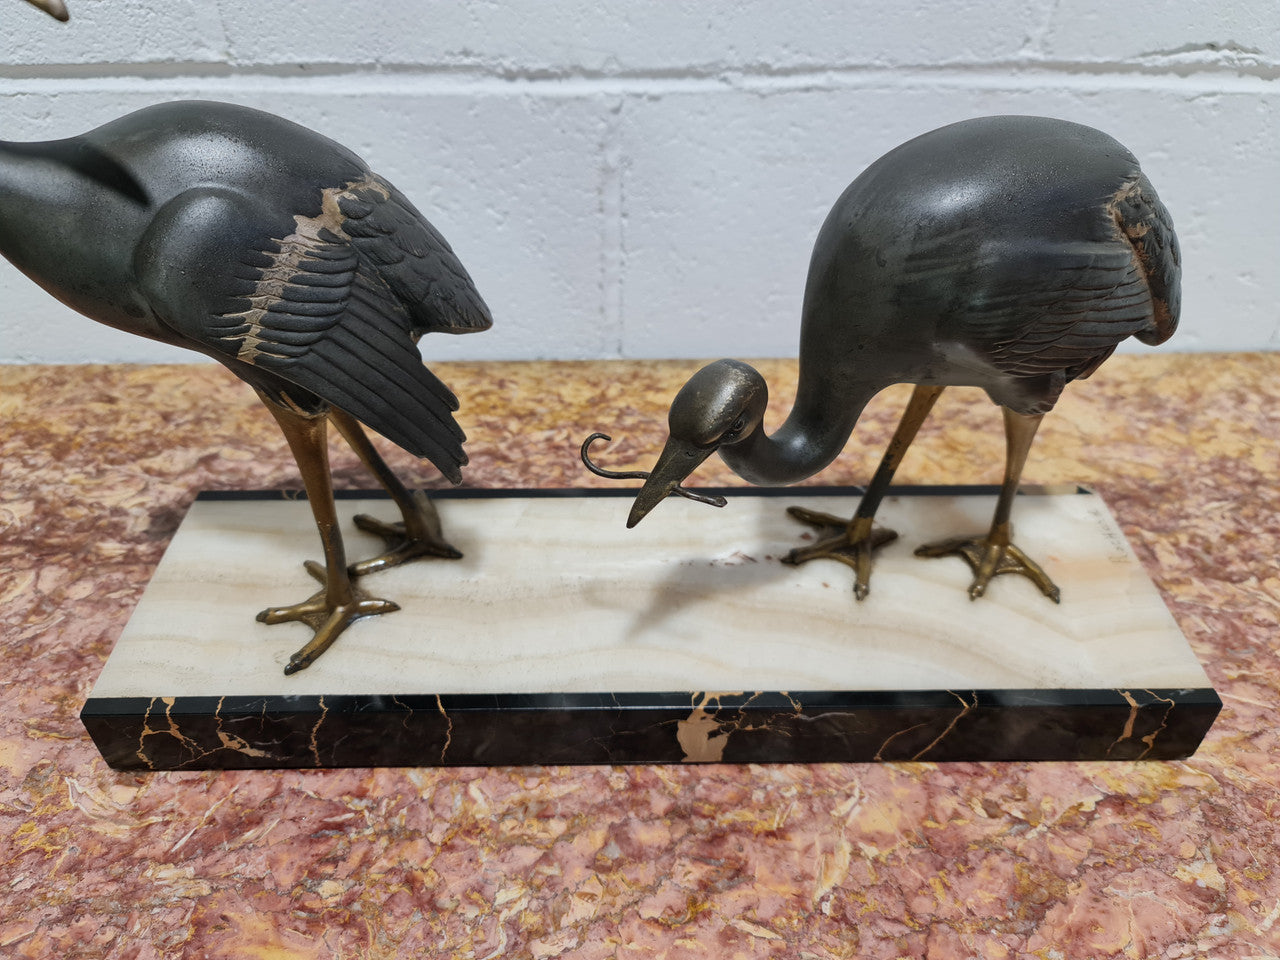 Fabulous French Art Deco cold painted spelter Ibis birds on a stylized Art Deco marble base. Signed "Rochard" circa 1930's. In good original detailed condition.